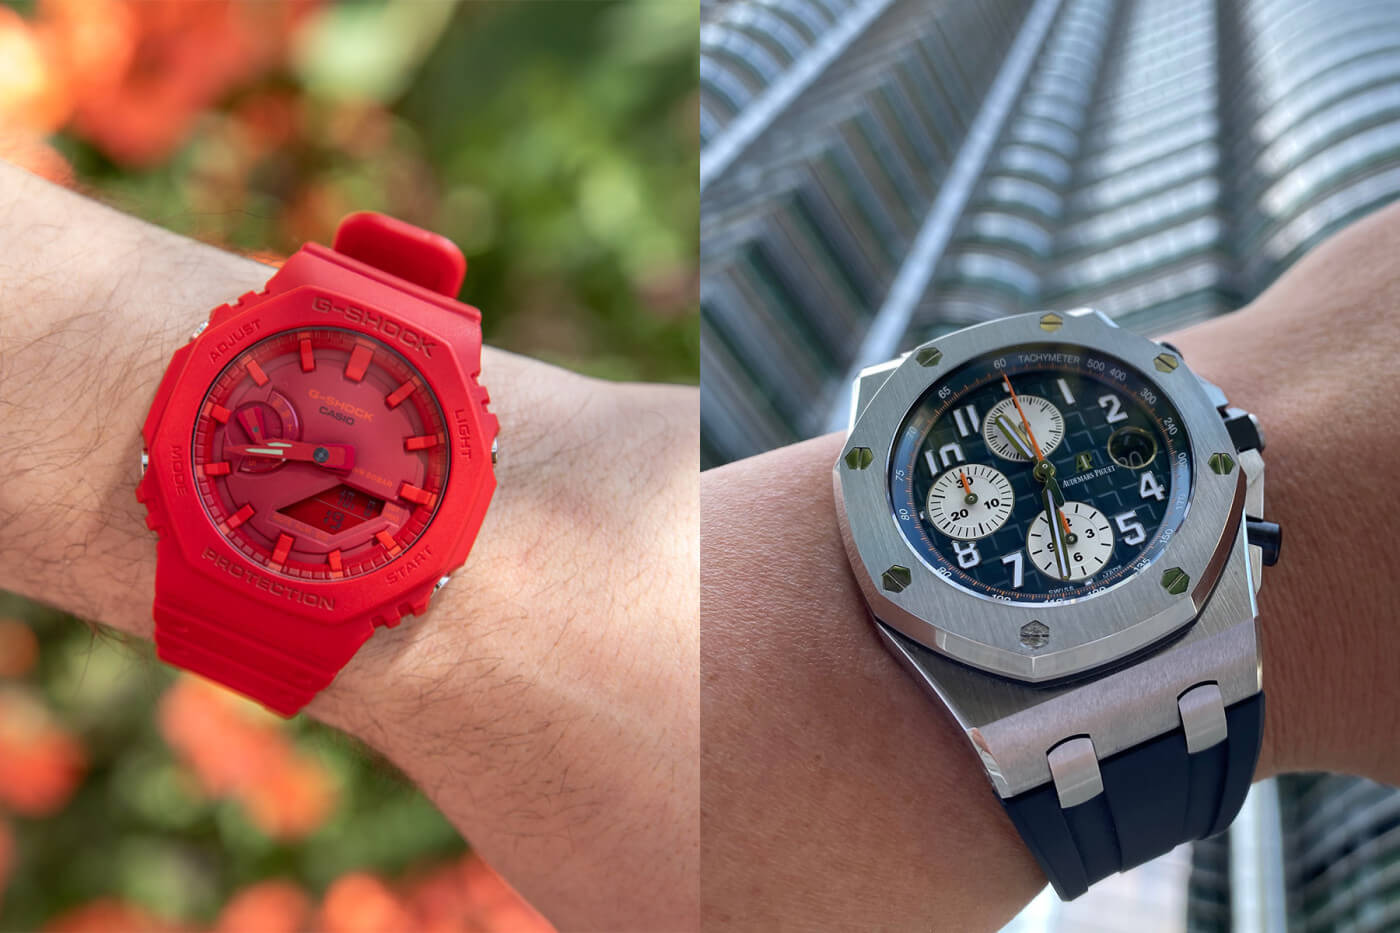 7 Reasons to Own a CasiOak G-Shock Watch: homage to another watch 